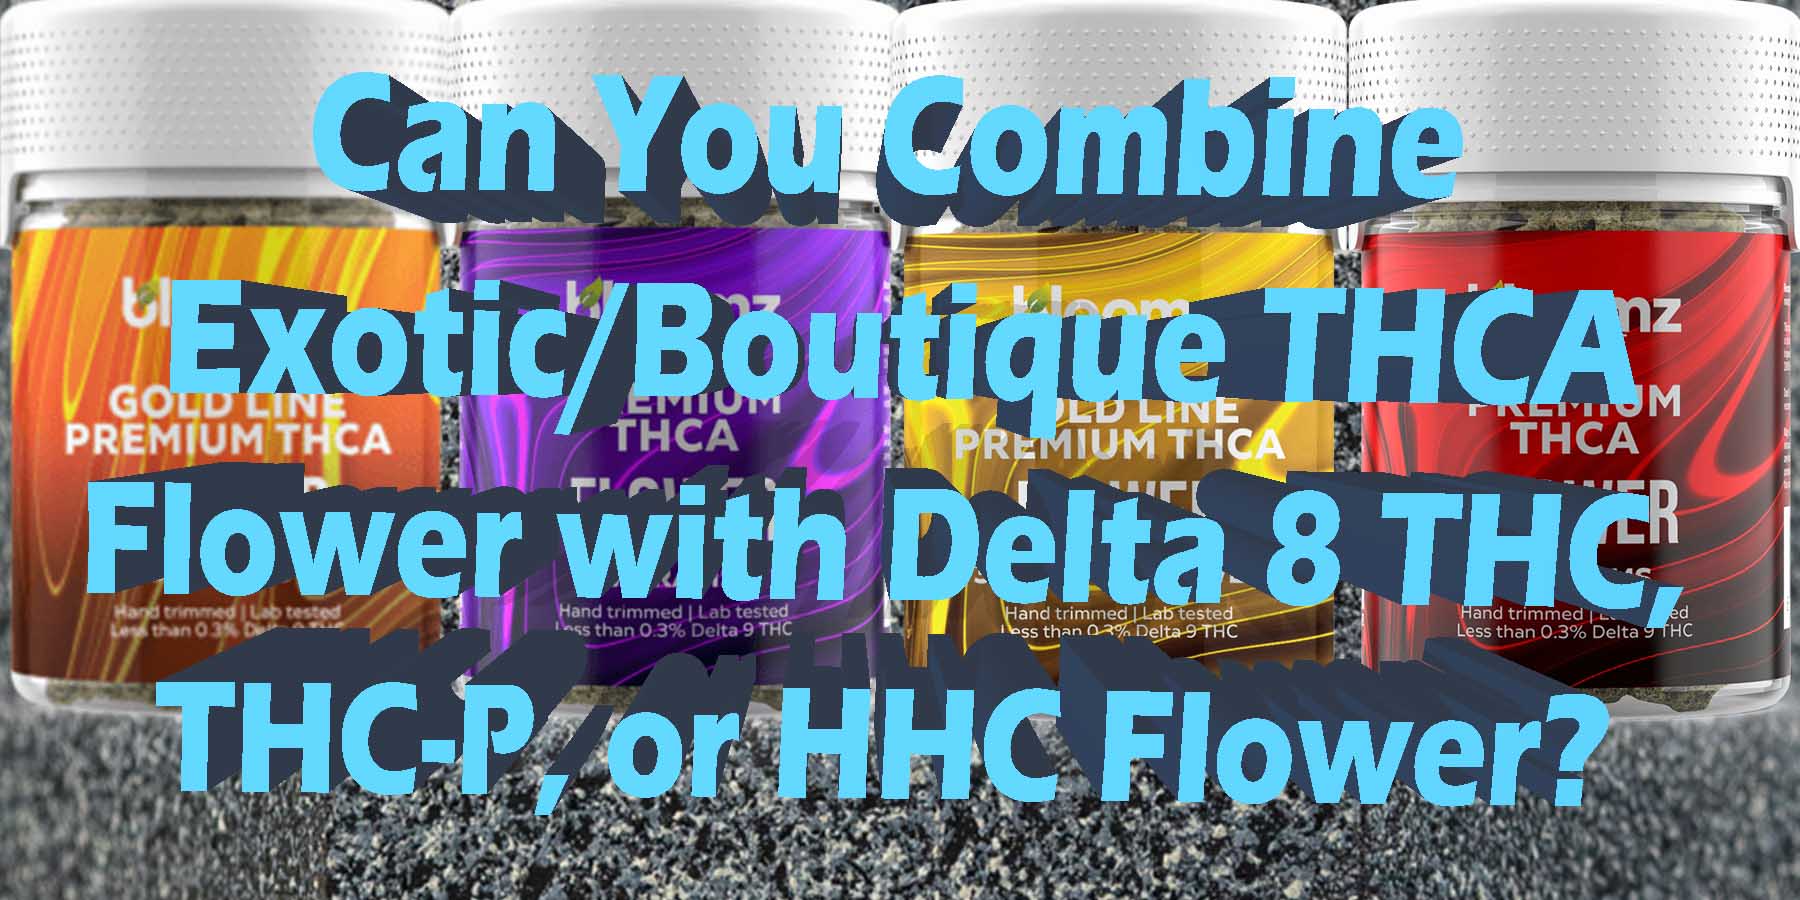 Can You Combine ExoticBoutique THCA Flower with Delta 8 THC THC-P or HHC Hemp-Flower BestBrand GoodPrice GetNearMe LowestCoupon Discount